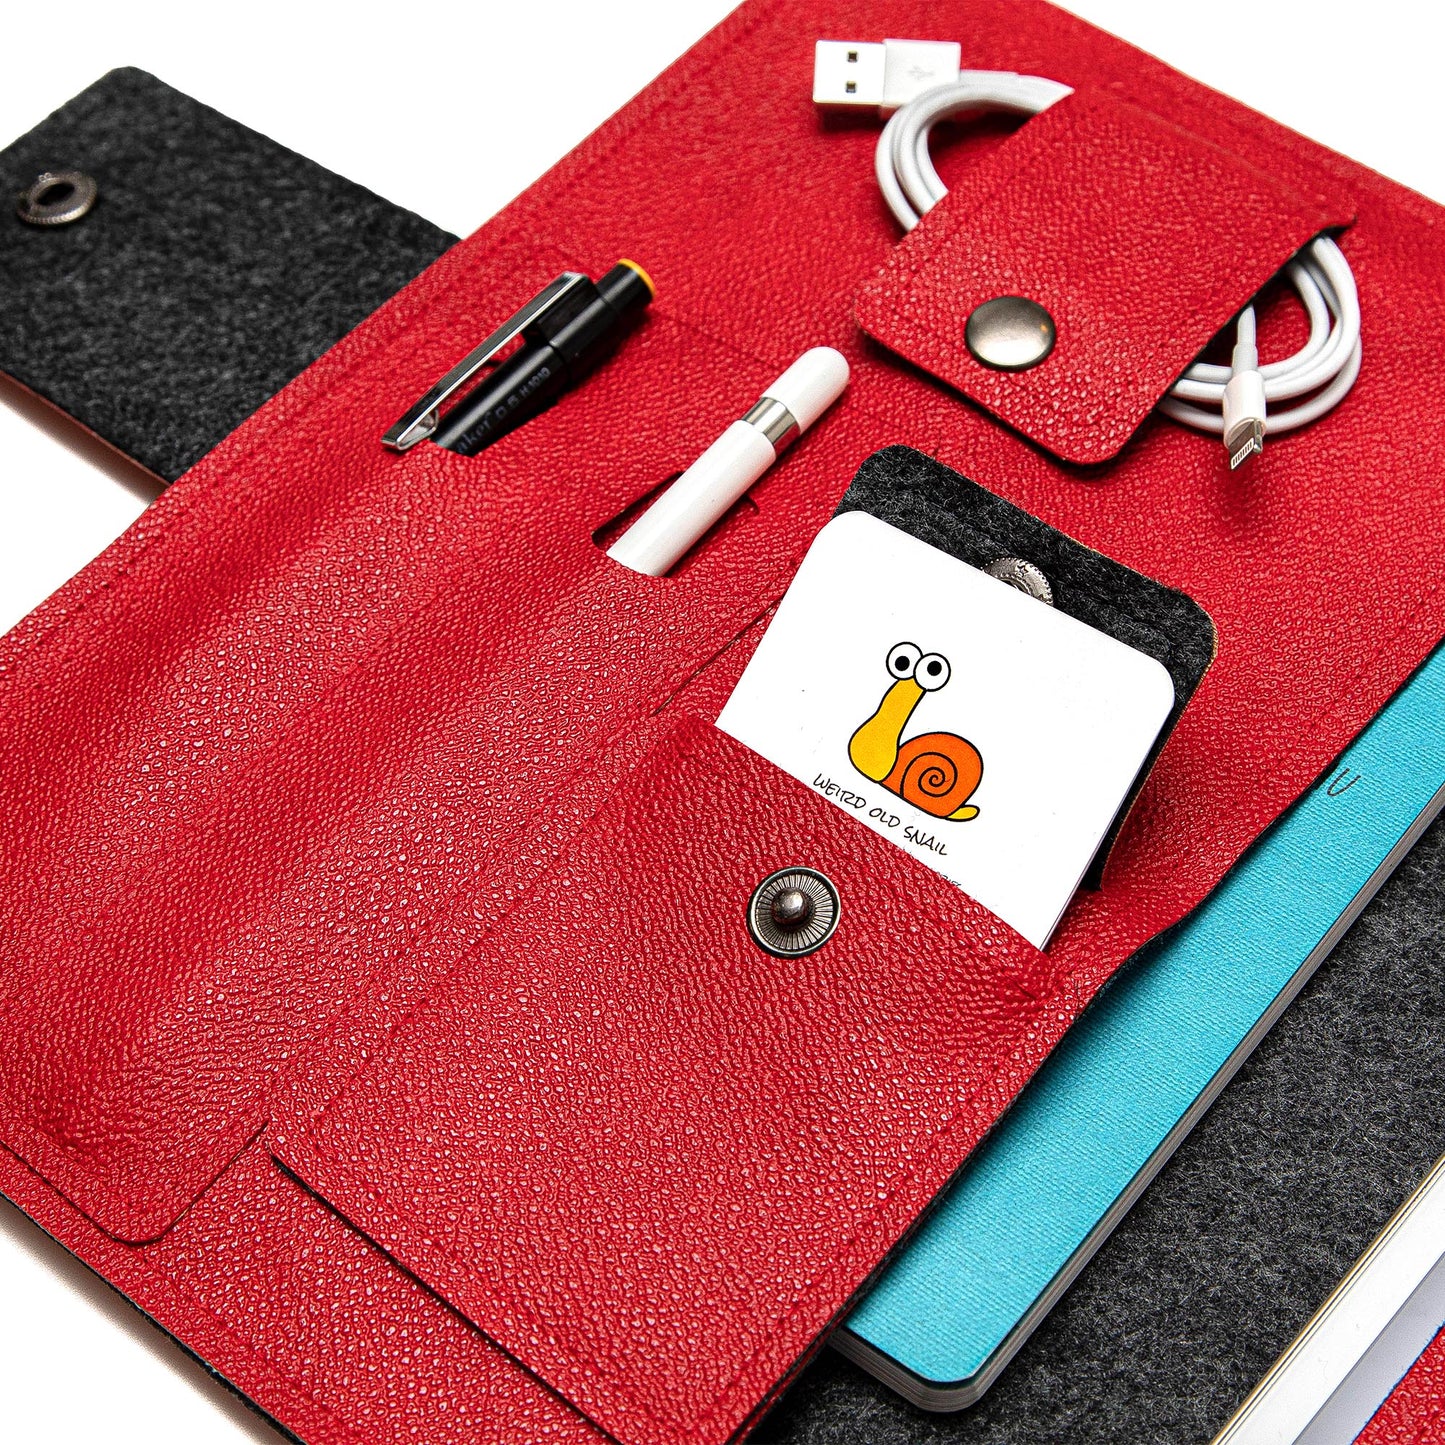 Handmade Red Faux Leather Folio Cover for Apple iPad